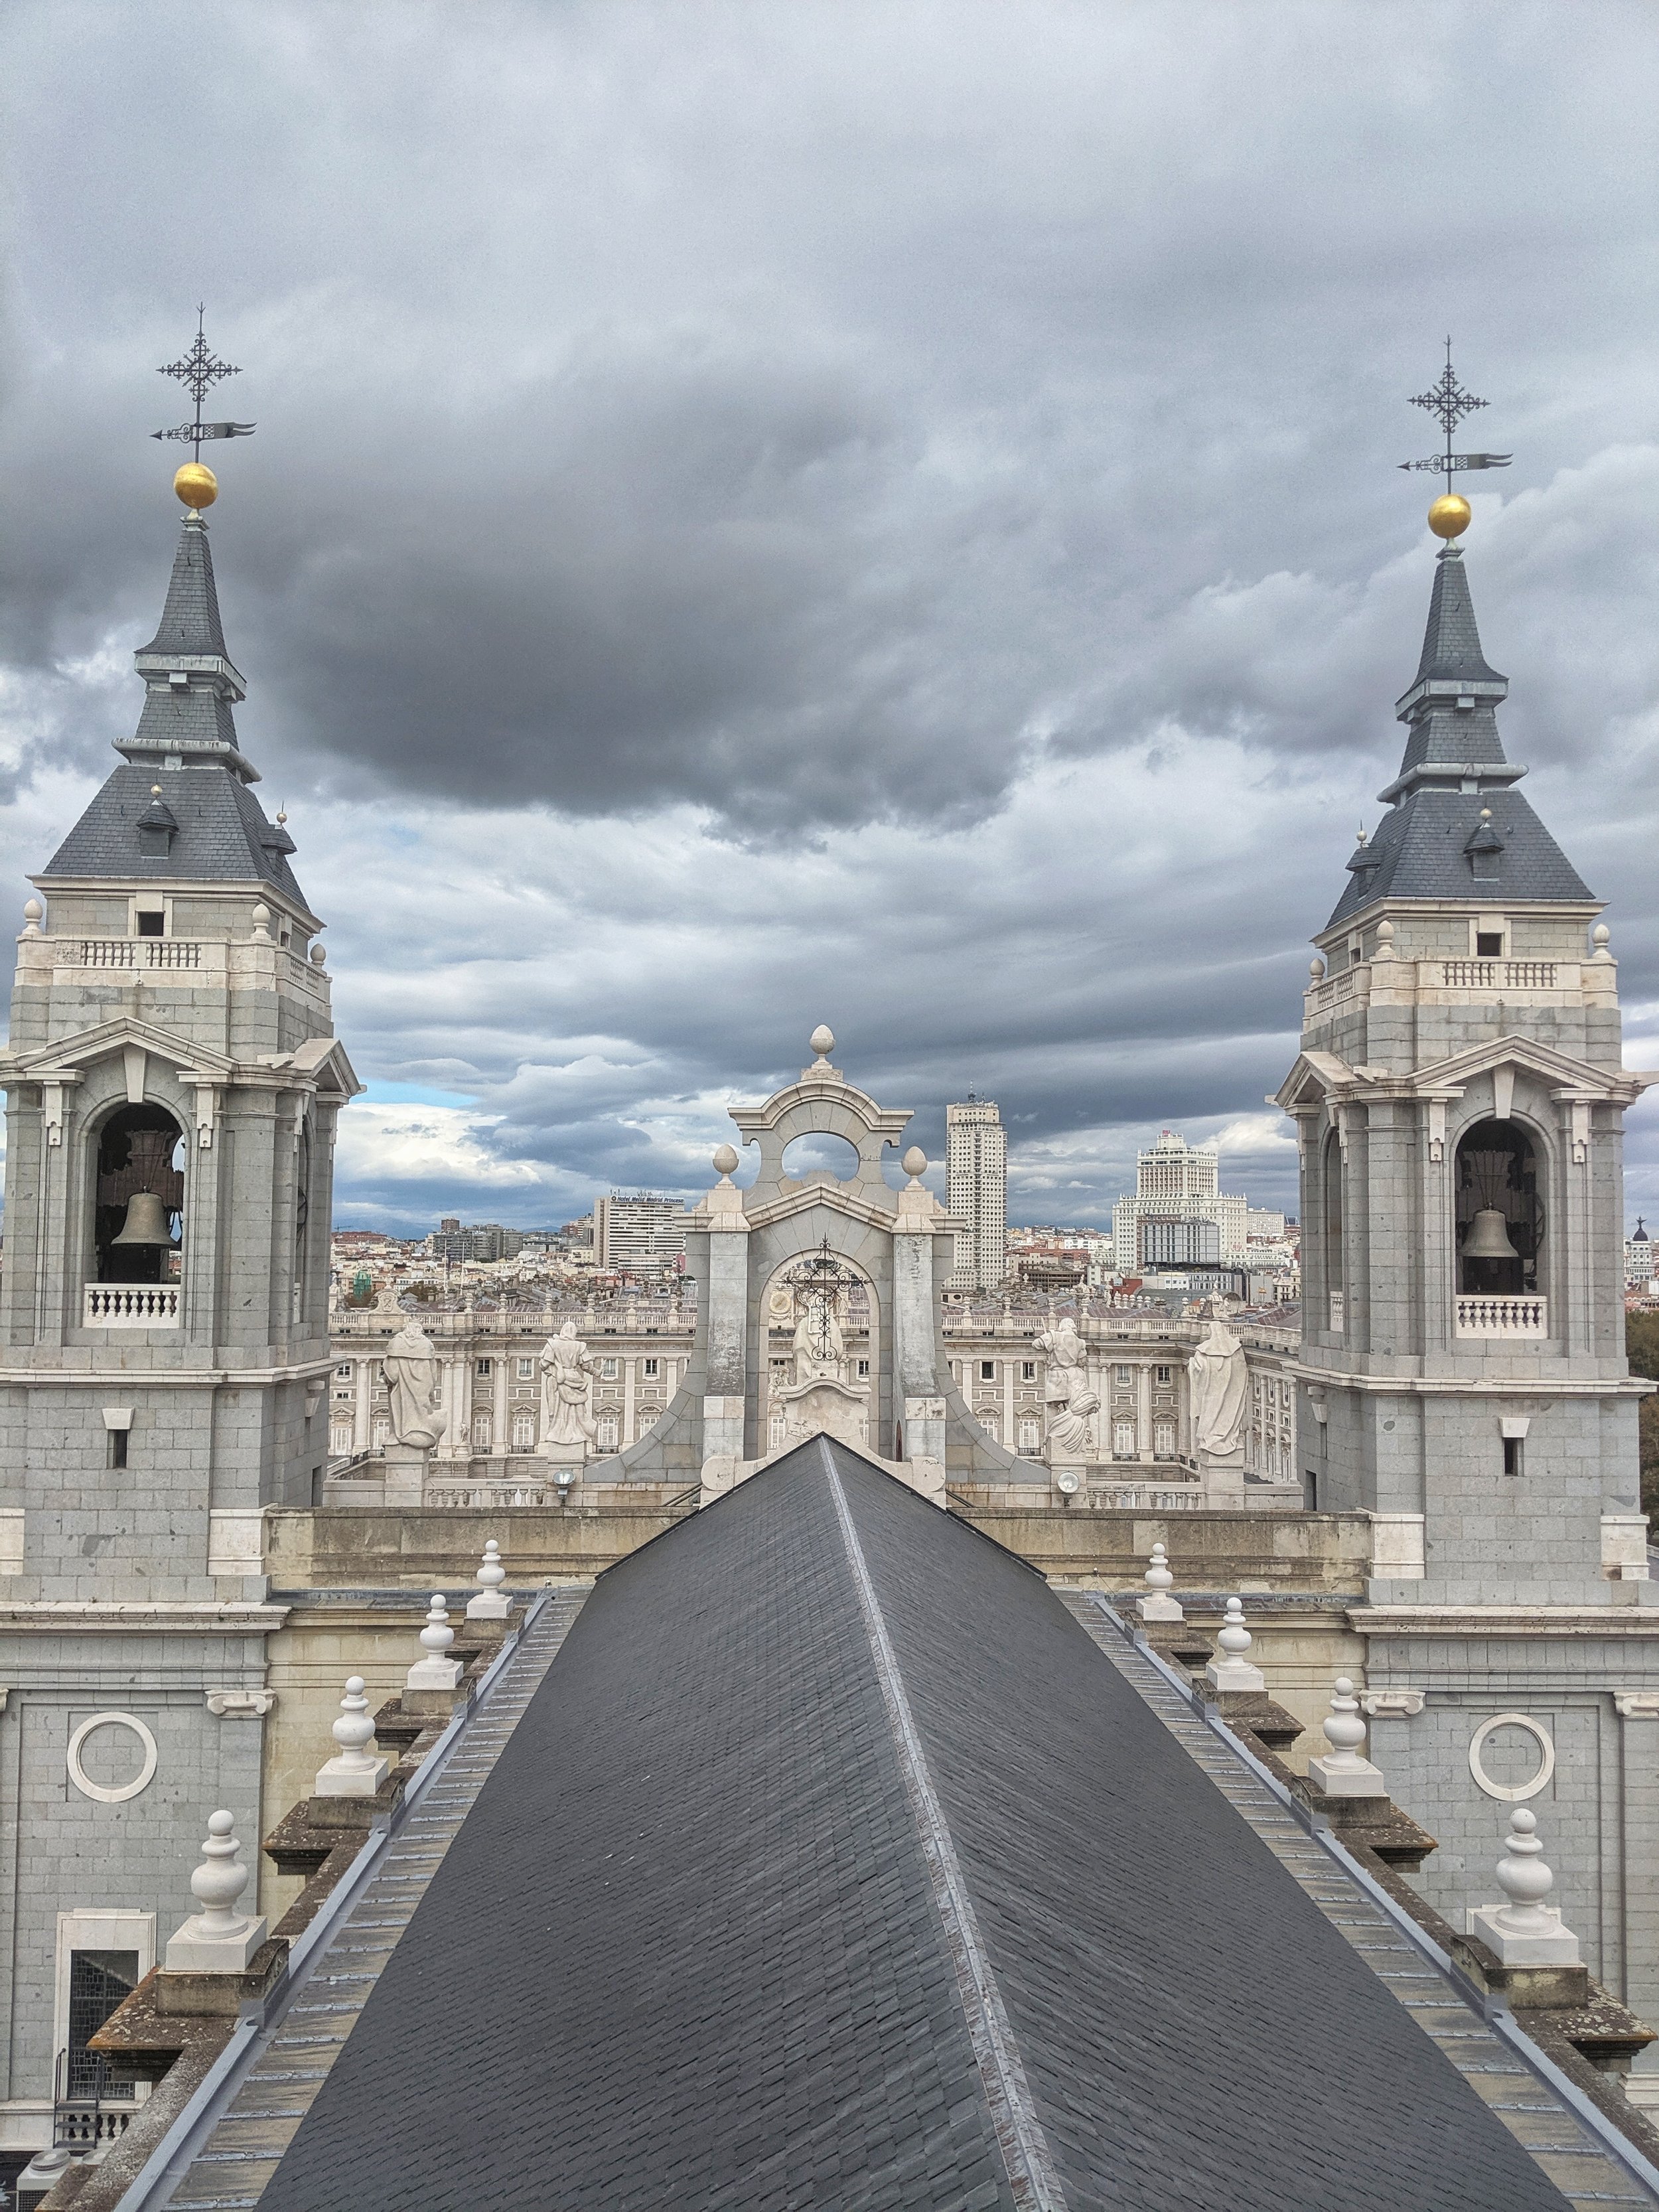 The view from above - Cathedral de Santa Maria - Madrid, Spain